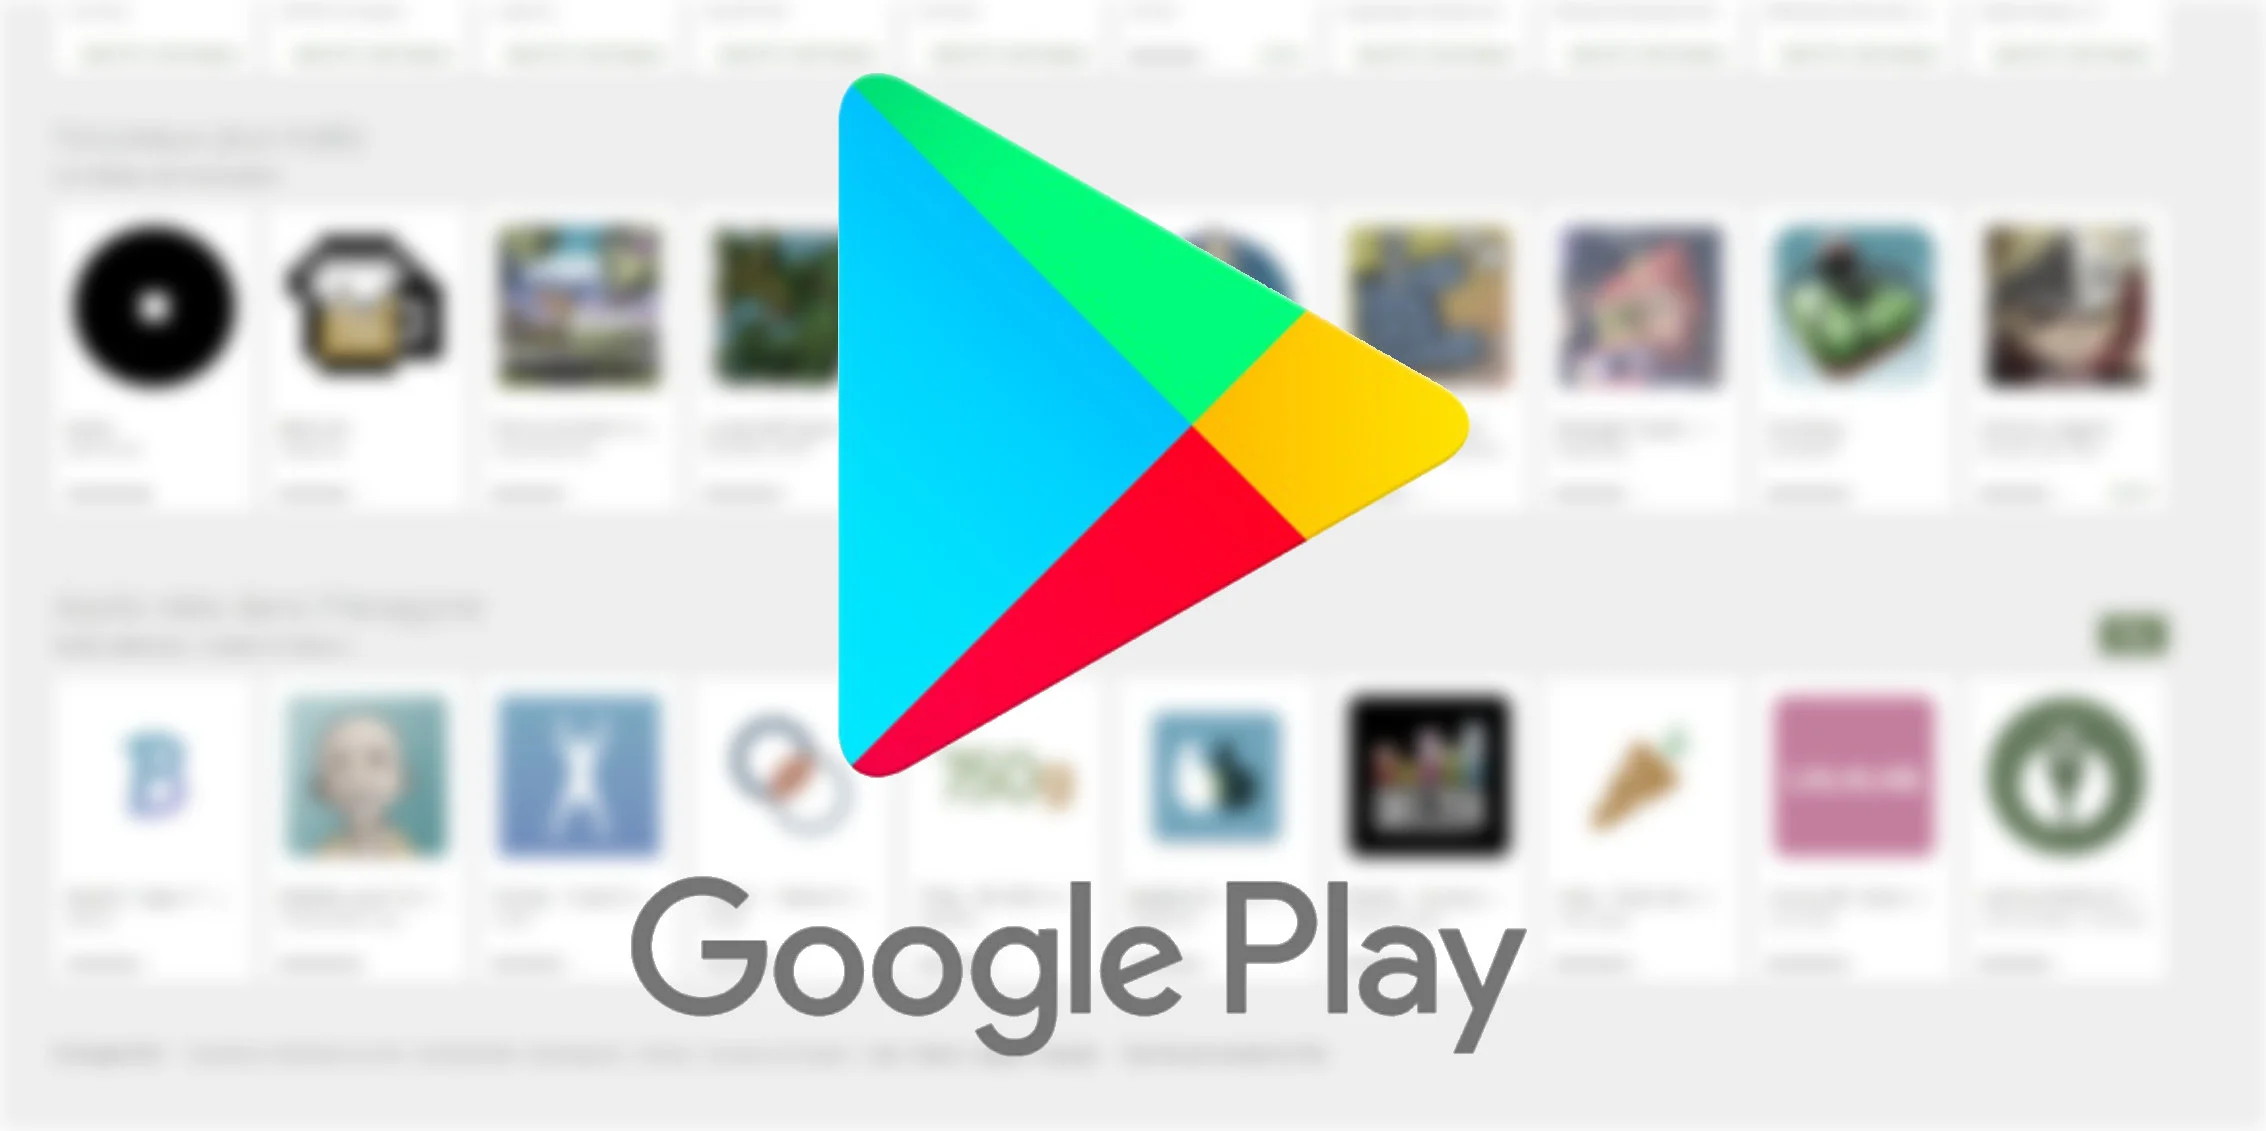 Google Play Store to Introduce Quick Fix for App Crashes